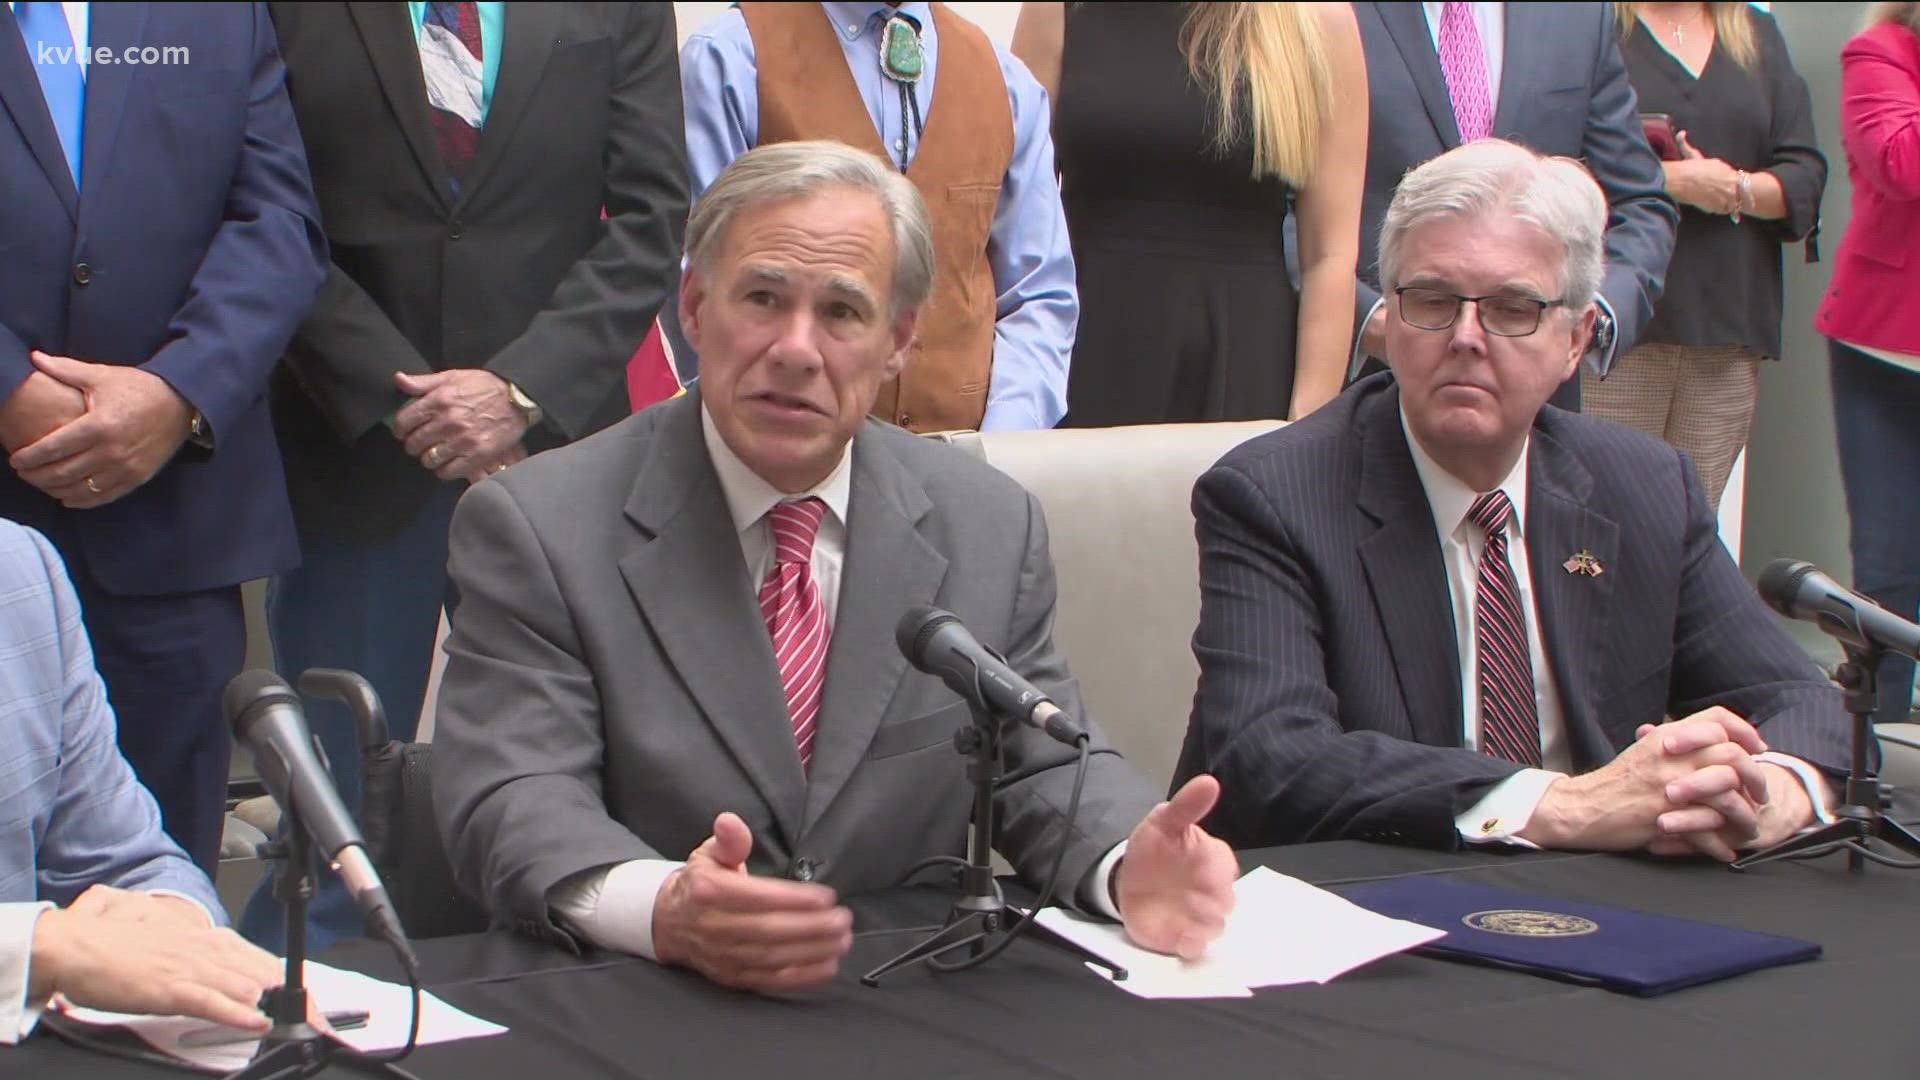 Gov. Greg Abbott is responding to criticism of the state's new abortion law, which bans abortions as soon as a fetal heartbeat is detected.